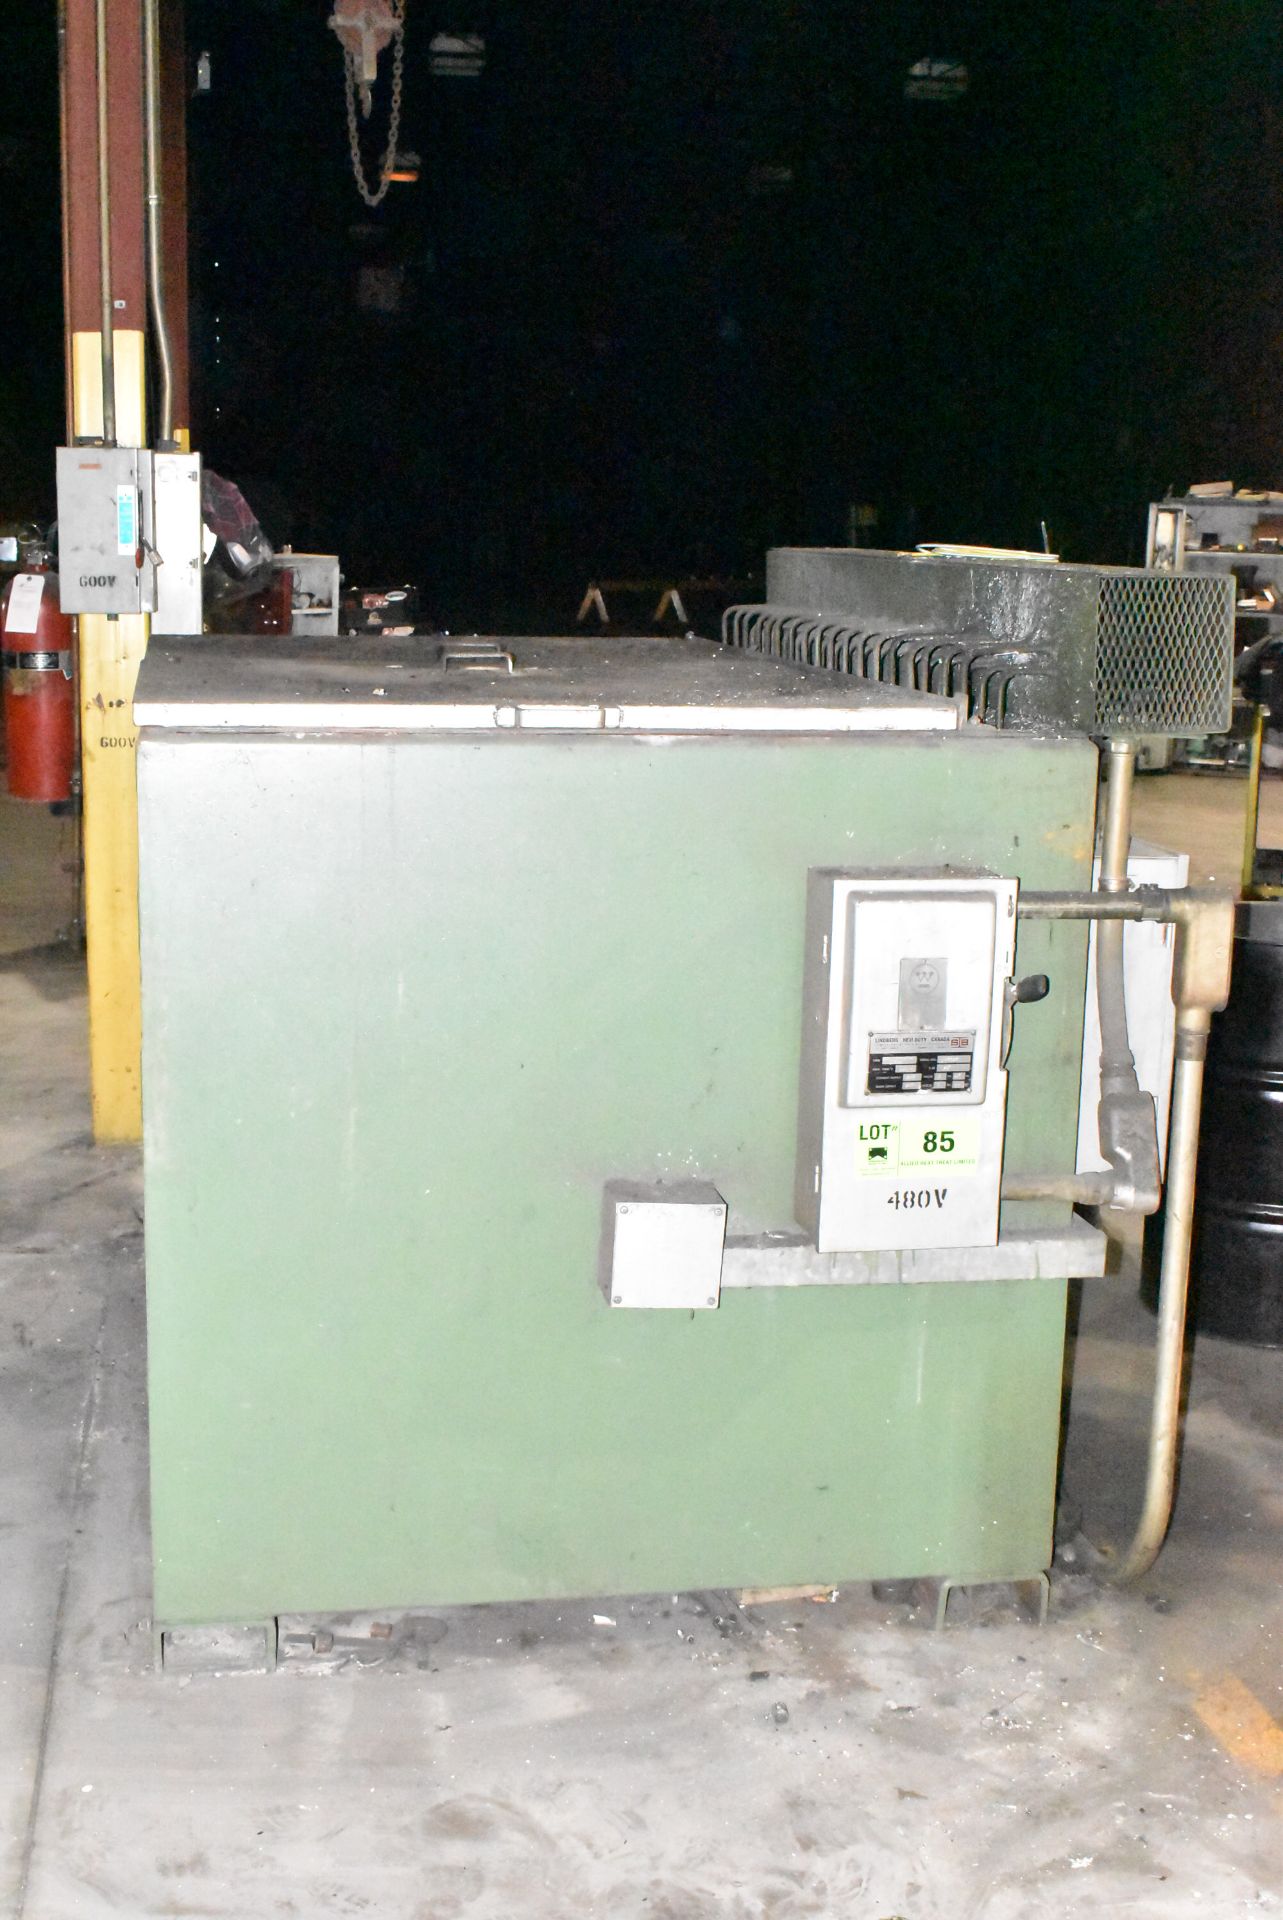 LINDBERG MODEL 484872 ELECTRIC SALT FURNACE WITH 500 DEGREES F MAX TEMP, 48"Wx72"Lx48"D APPROX SIZE,